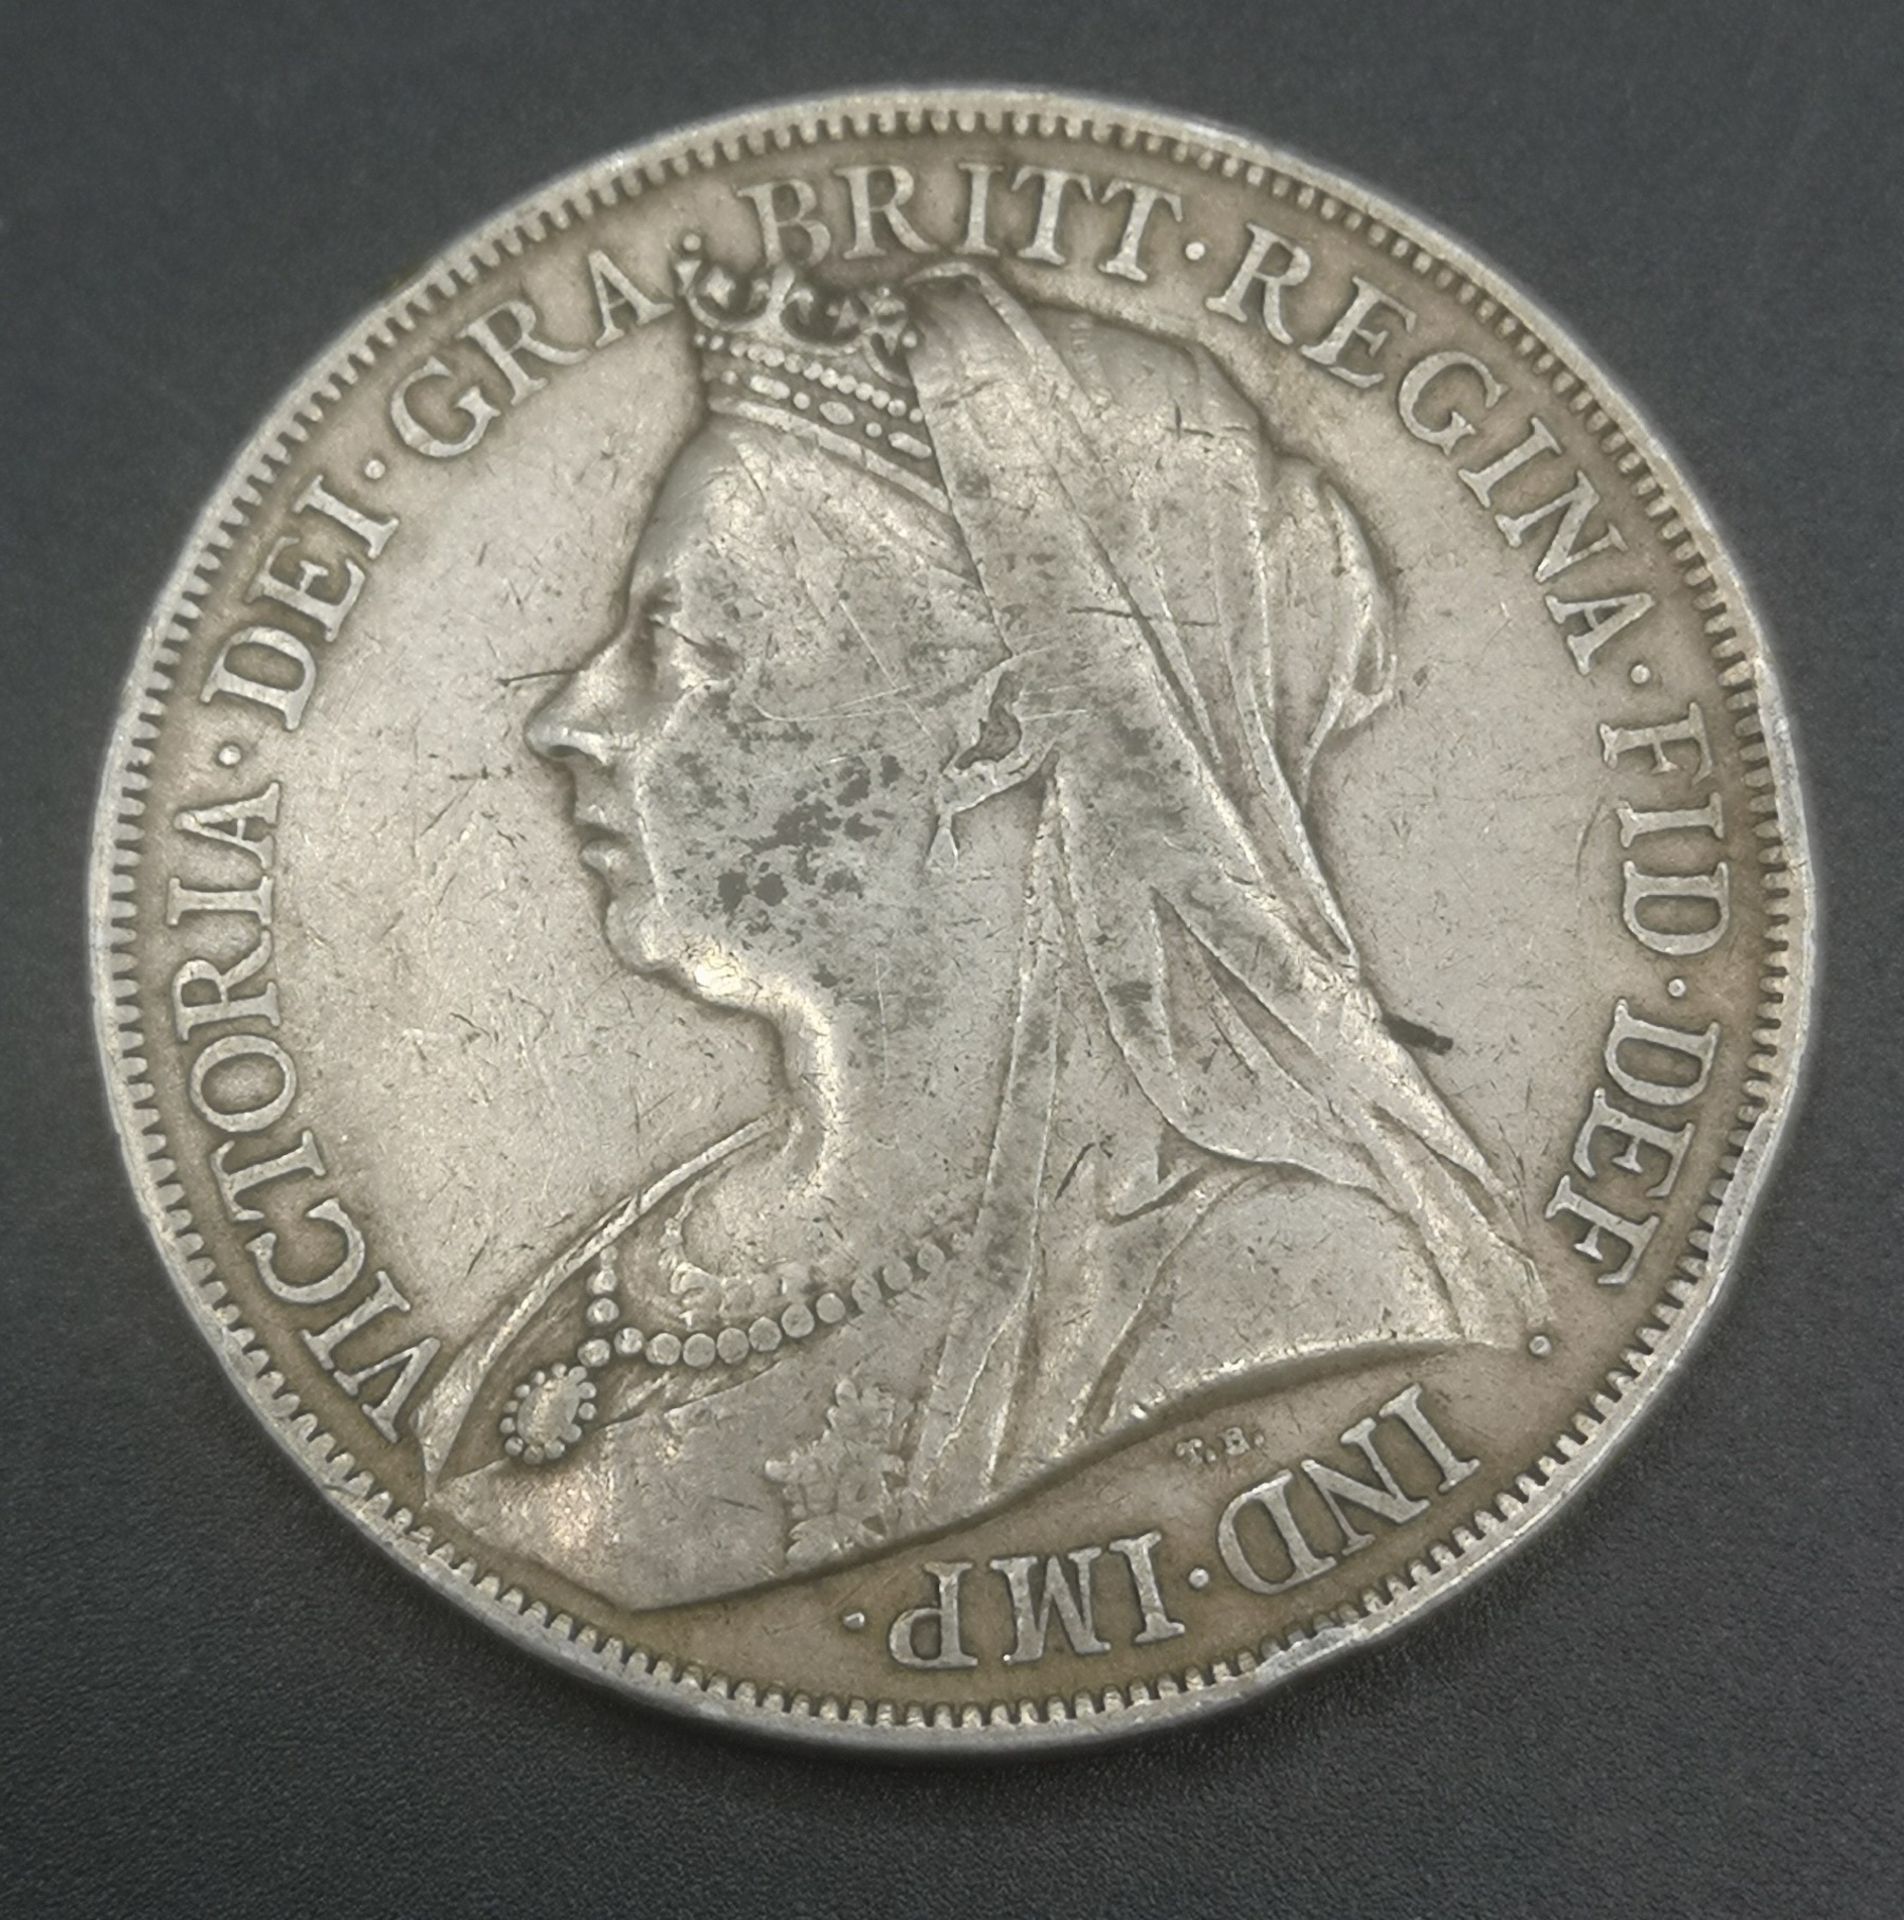 Three Queen Victoria crown coins: 1889, 1893, and 1900 - Image 8 of 10